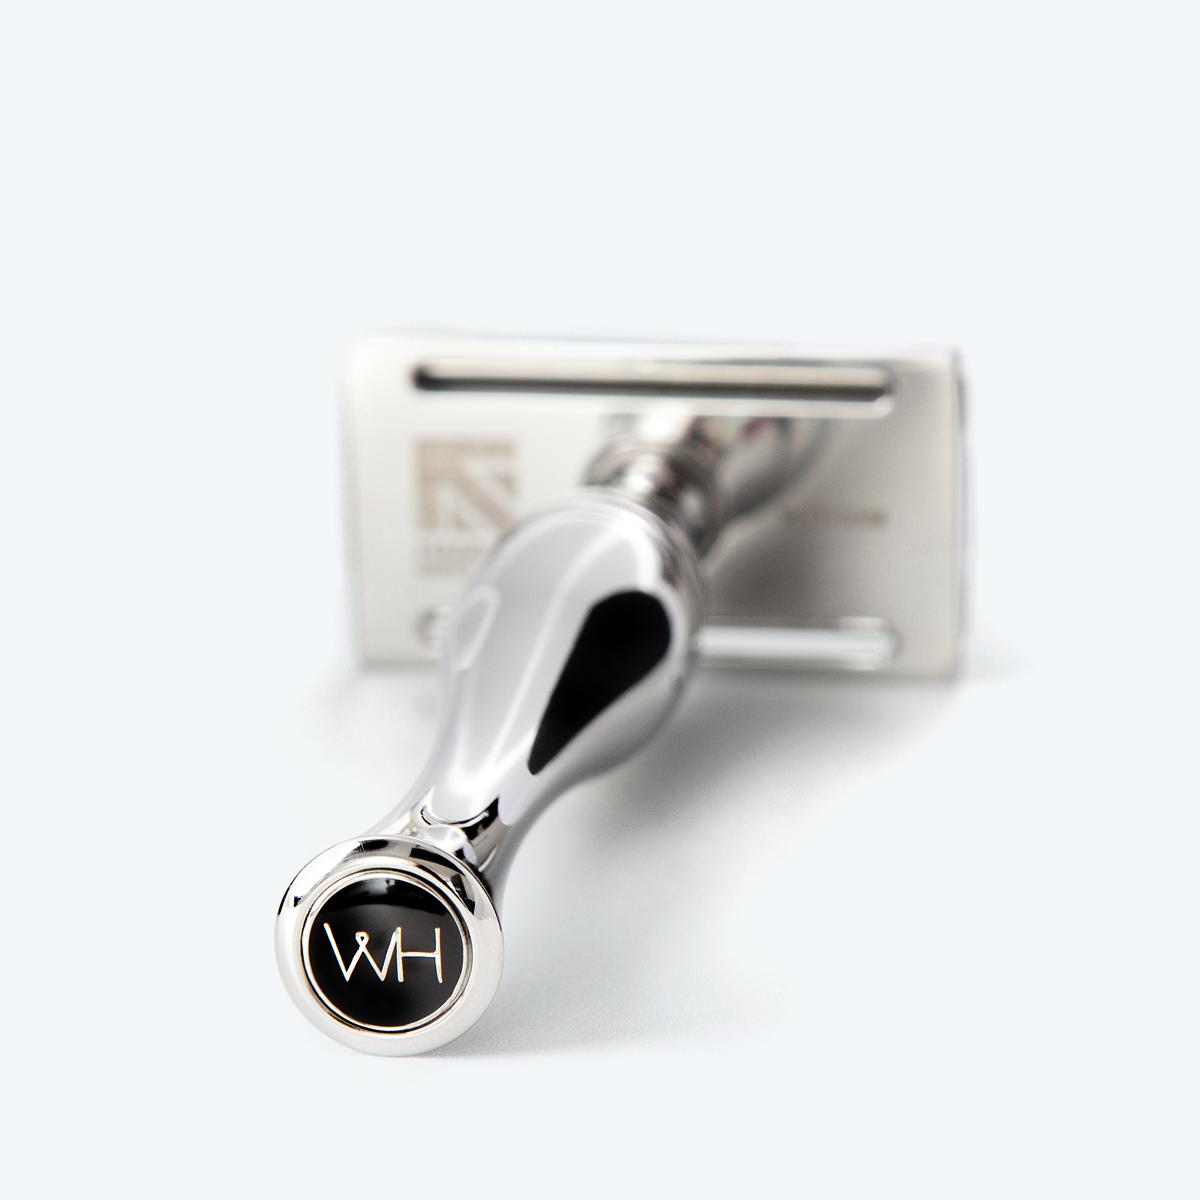 stainless steel safety razor made in Great Britain